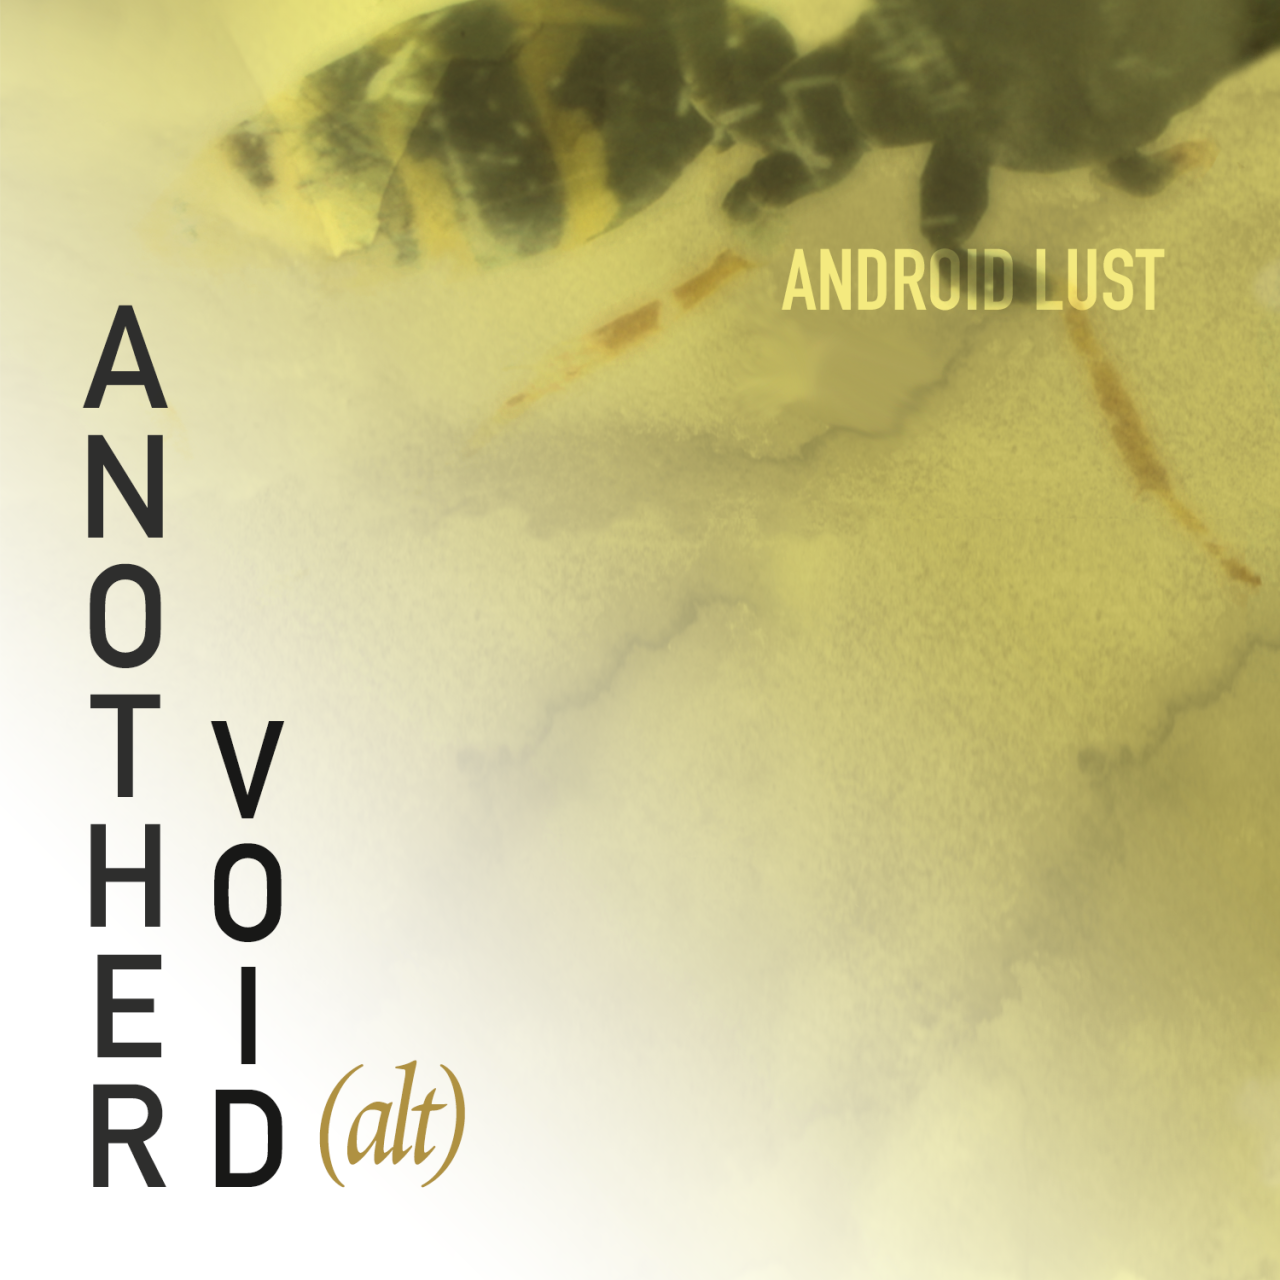 androidlustnews:
“ Another Void (alt) — unearthed remix. It’s a free/pay-what-you-want download from my Bandcamp.‬ A remix from The Dividing sessions. I thought it had been lost but I recently came across it on an archived DAT.
Download Another Void...